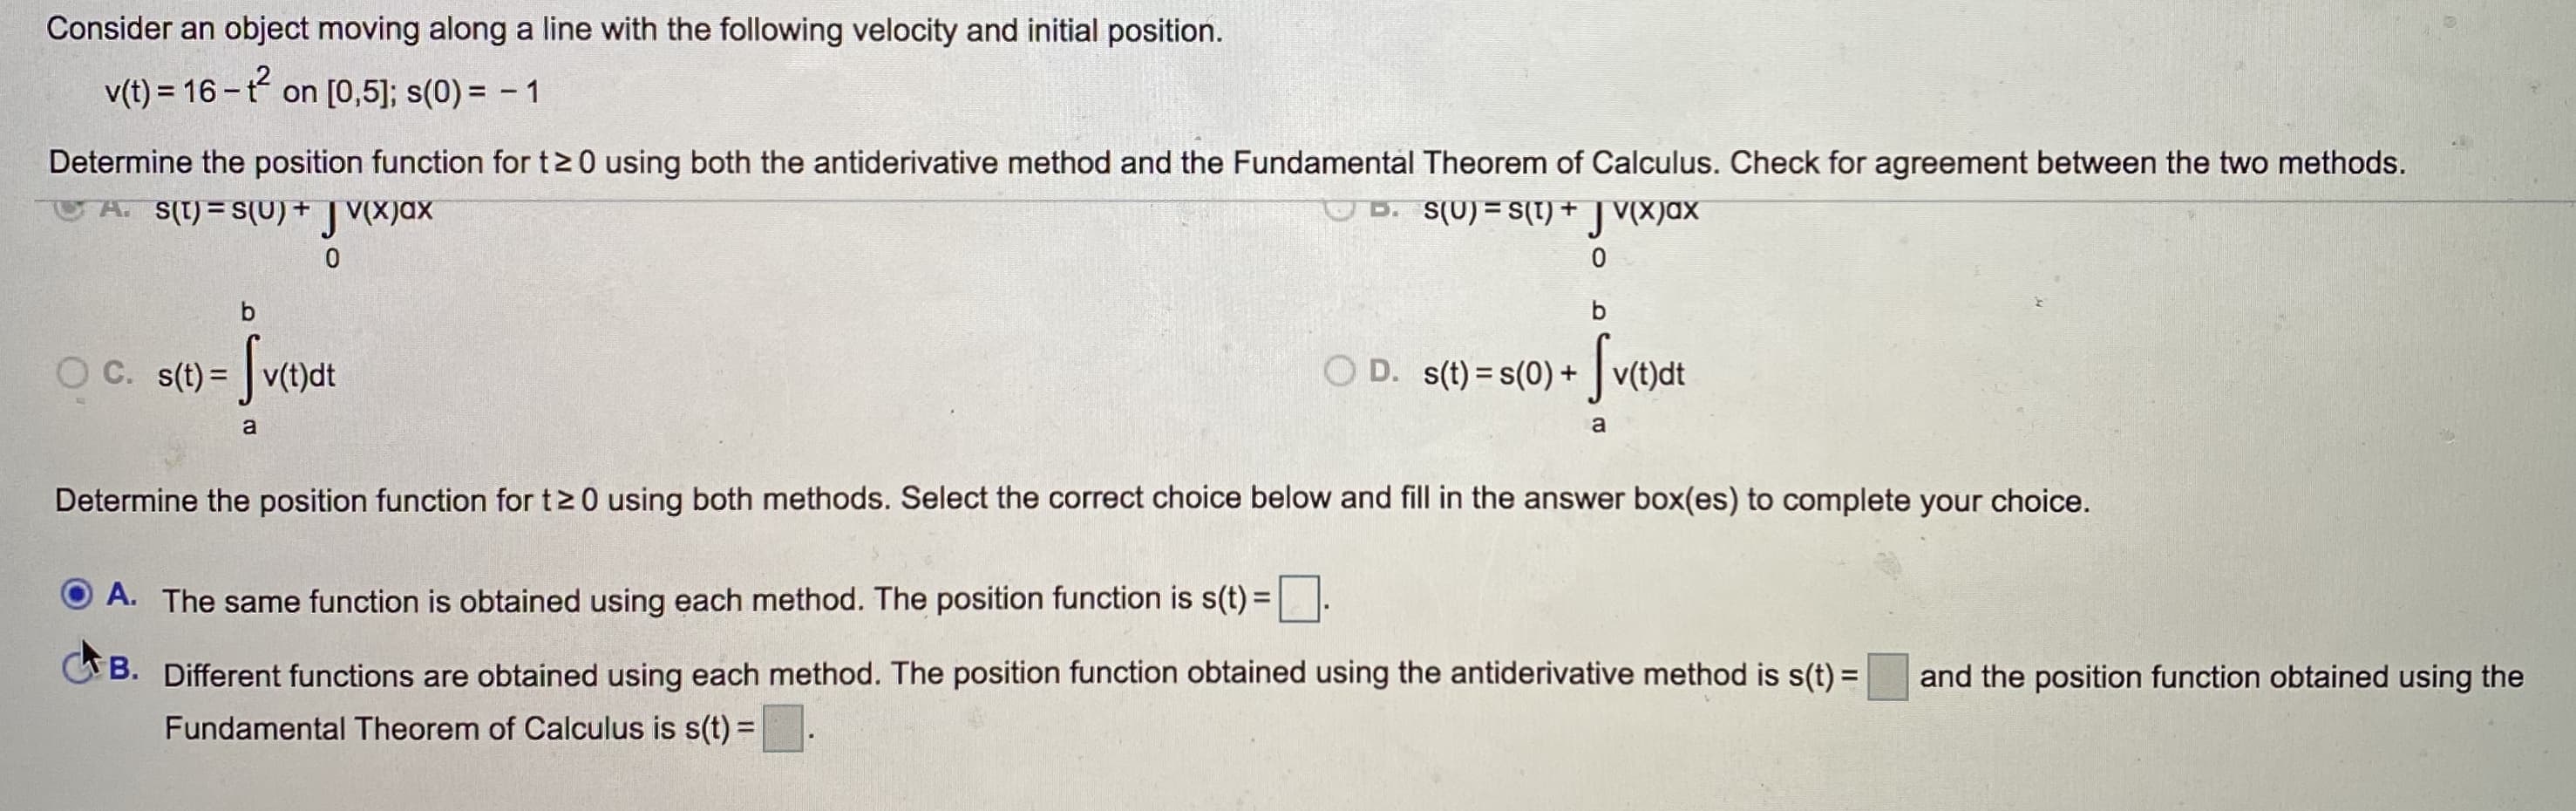 Consider an object moving along a line with the following velocity and initial position.
v(t) = 16 -t on [0,5]; s(0) = - 1
Determine the position function for t20 using both the antiderivative method and the Fundamental Theorem of Calculus. Check for agreement between the two methods.
